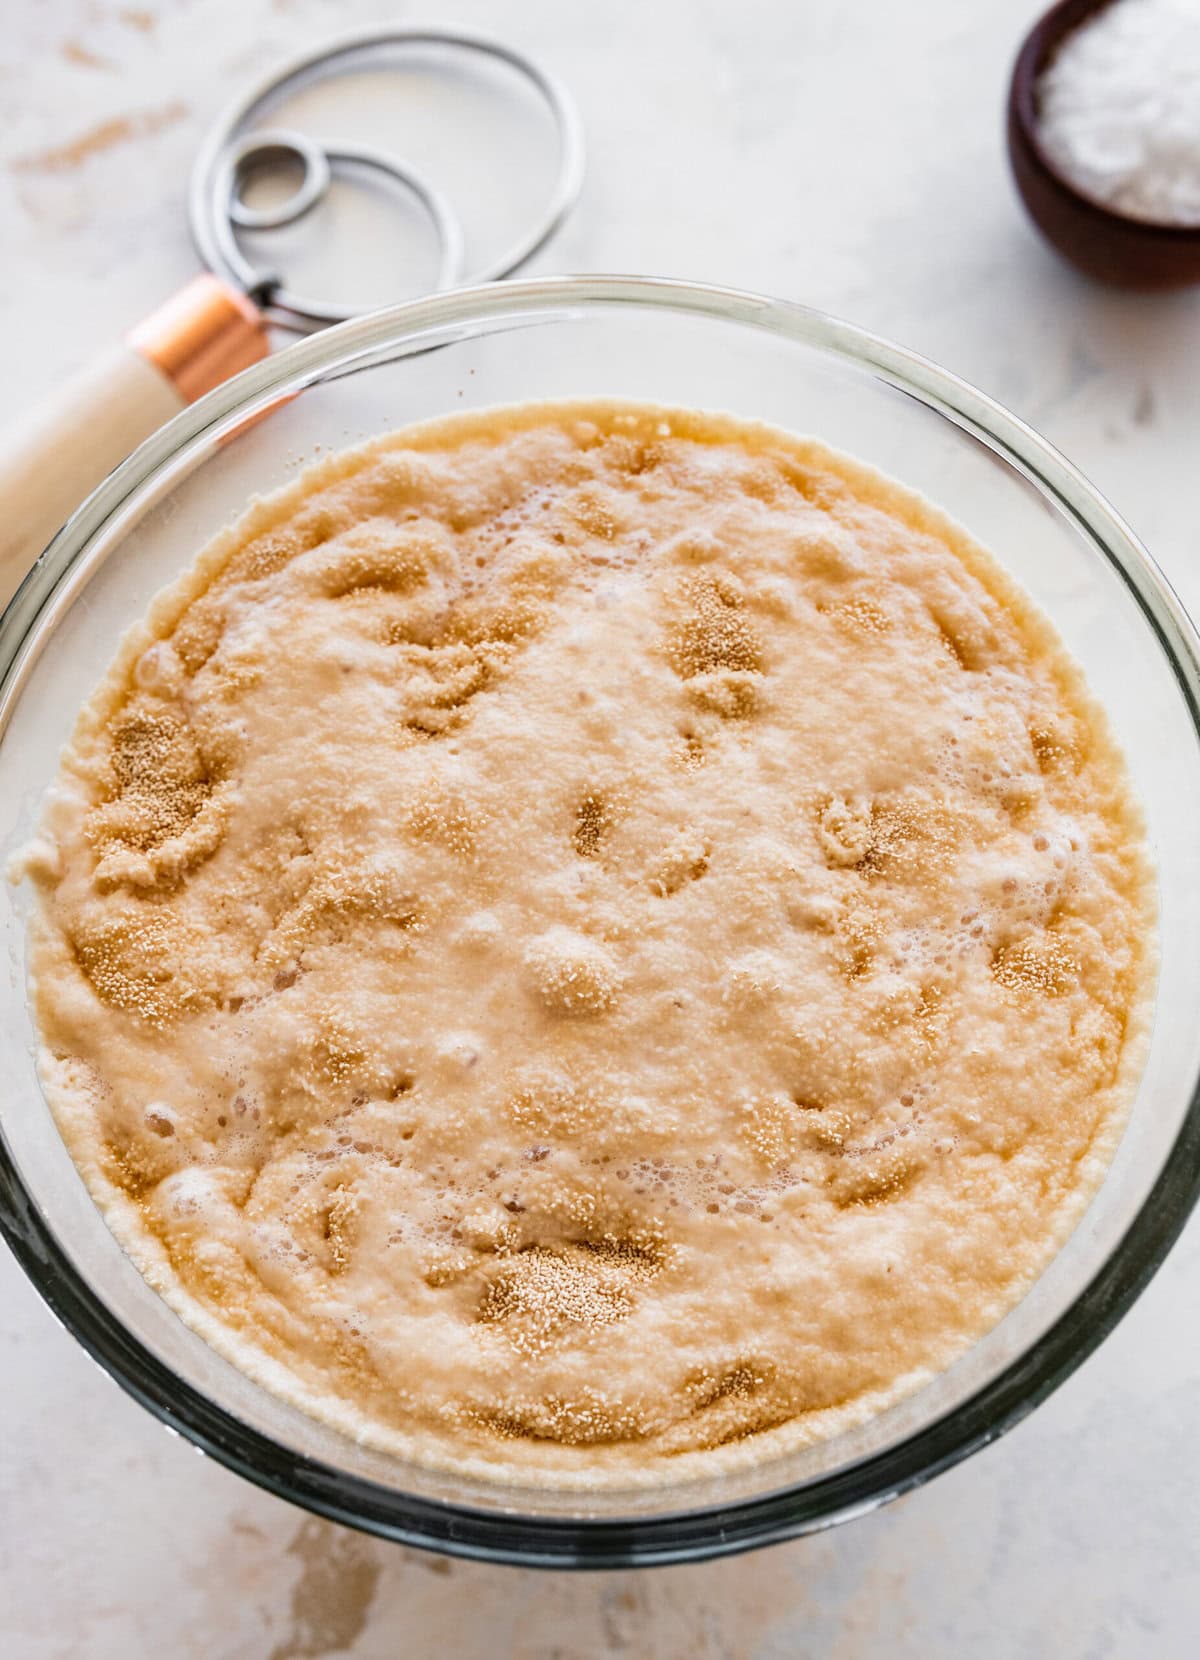 how to make no-knead focaccia bread step-by-step: add yeast and sugar to the water and let in bubble. When the yeast is activated you will see bubbles at the top.